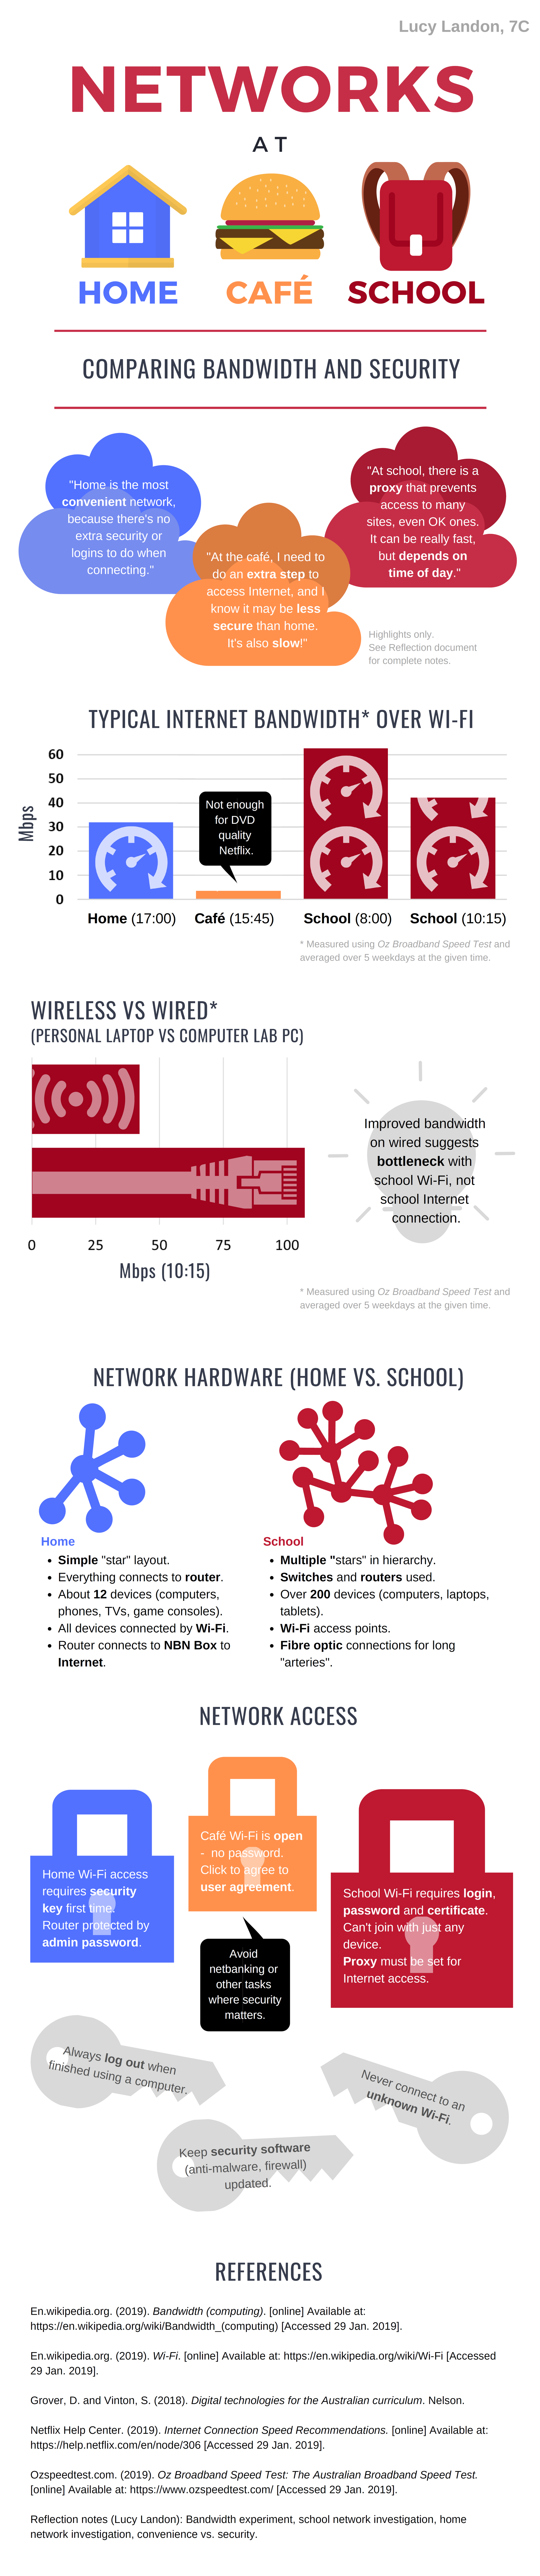 Infographic titled Networks at Home/ Cafe/ School